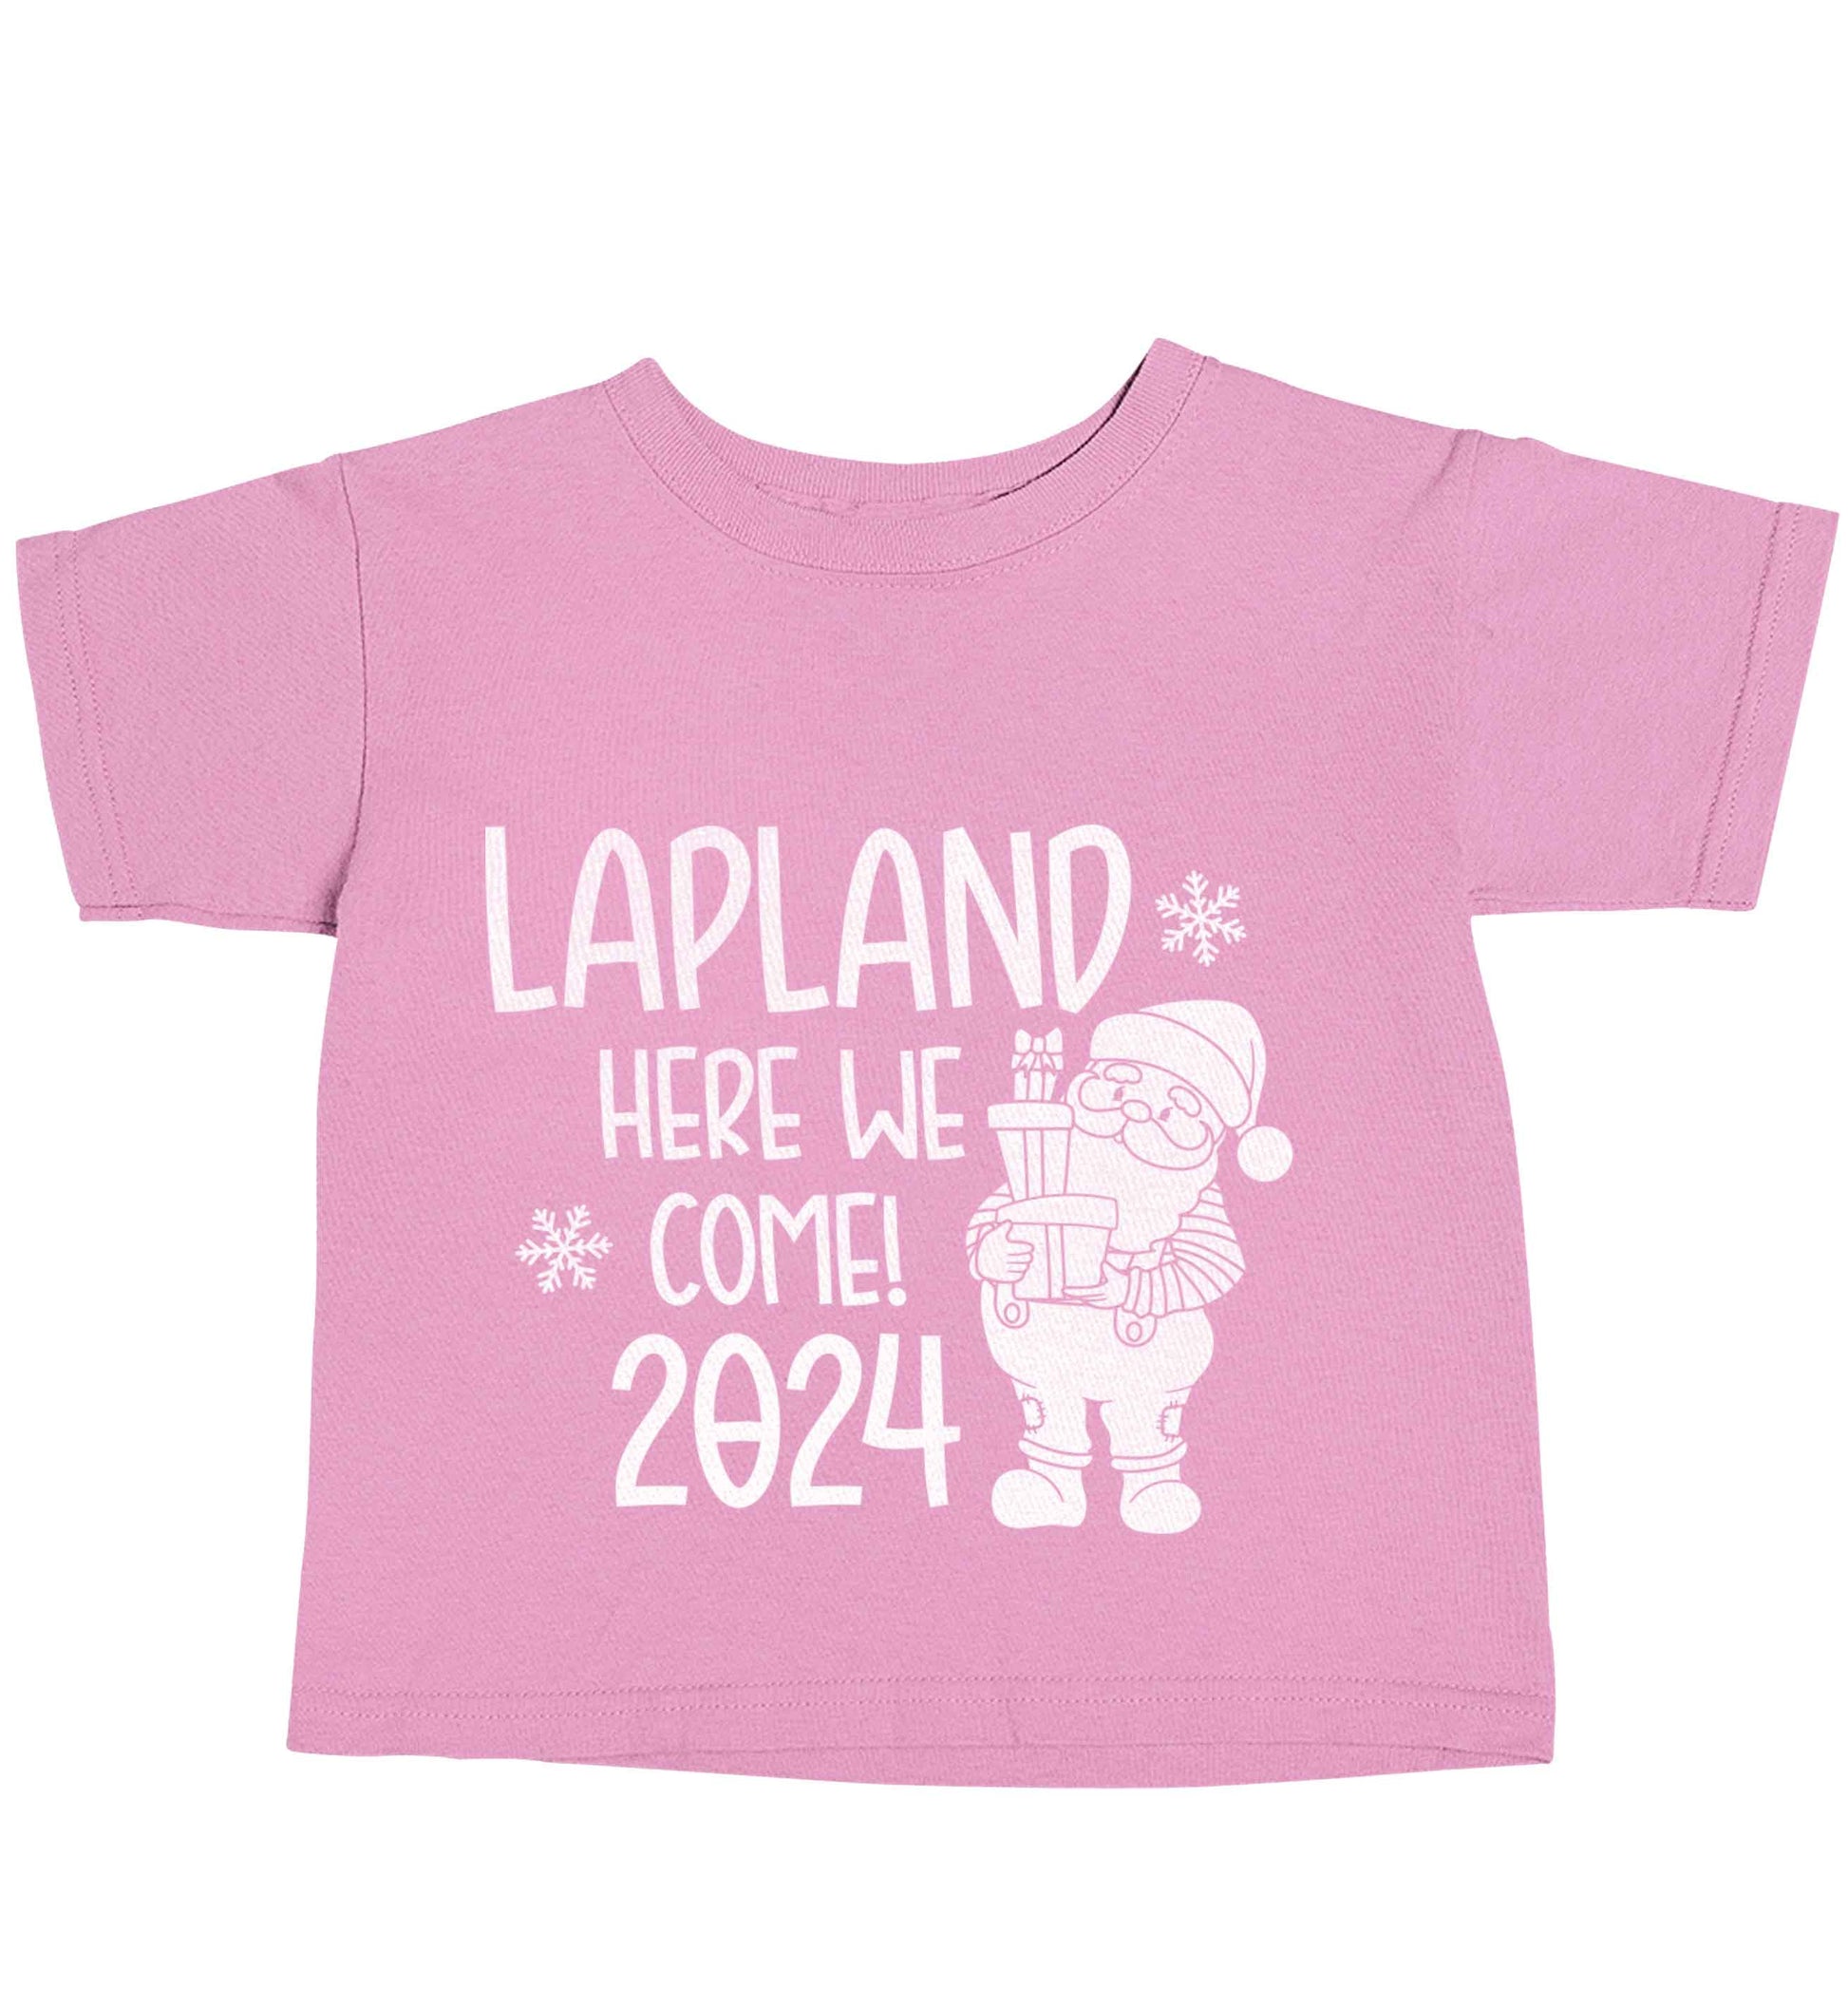 Lapland here we come light pink baby toddler Tshirt 2 Years